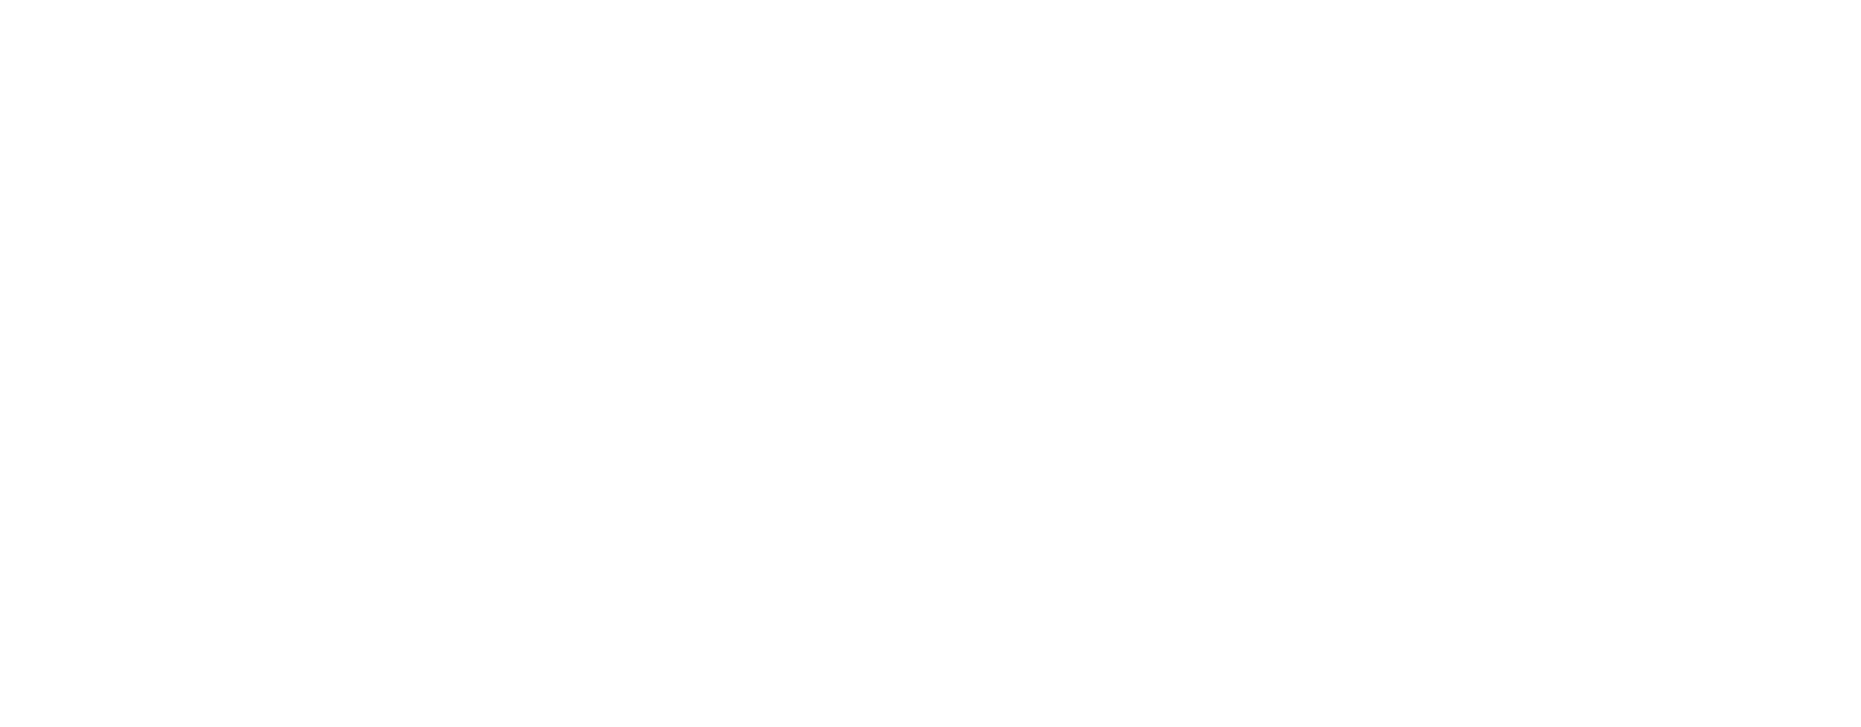 Life Ed. Every child deserves to thrive